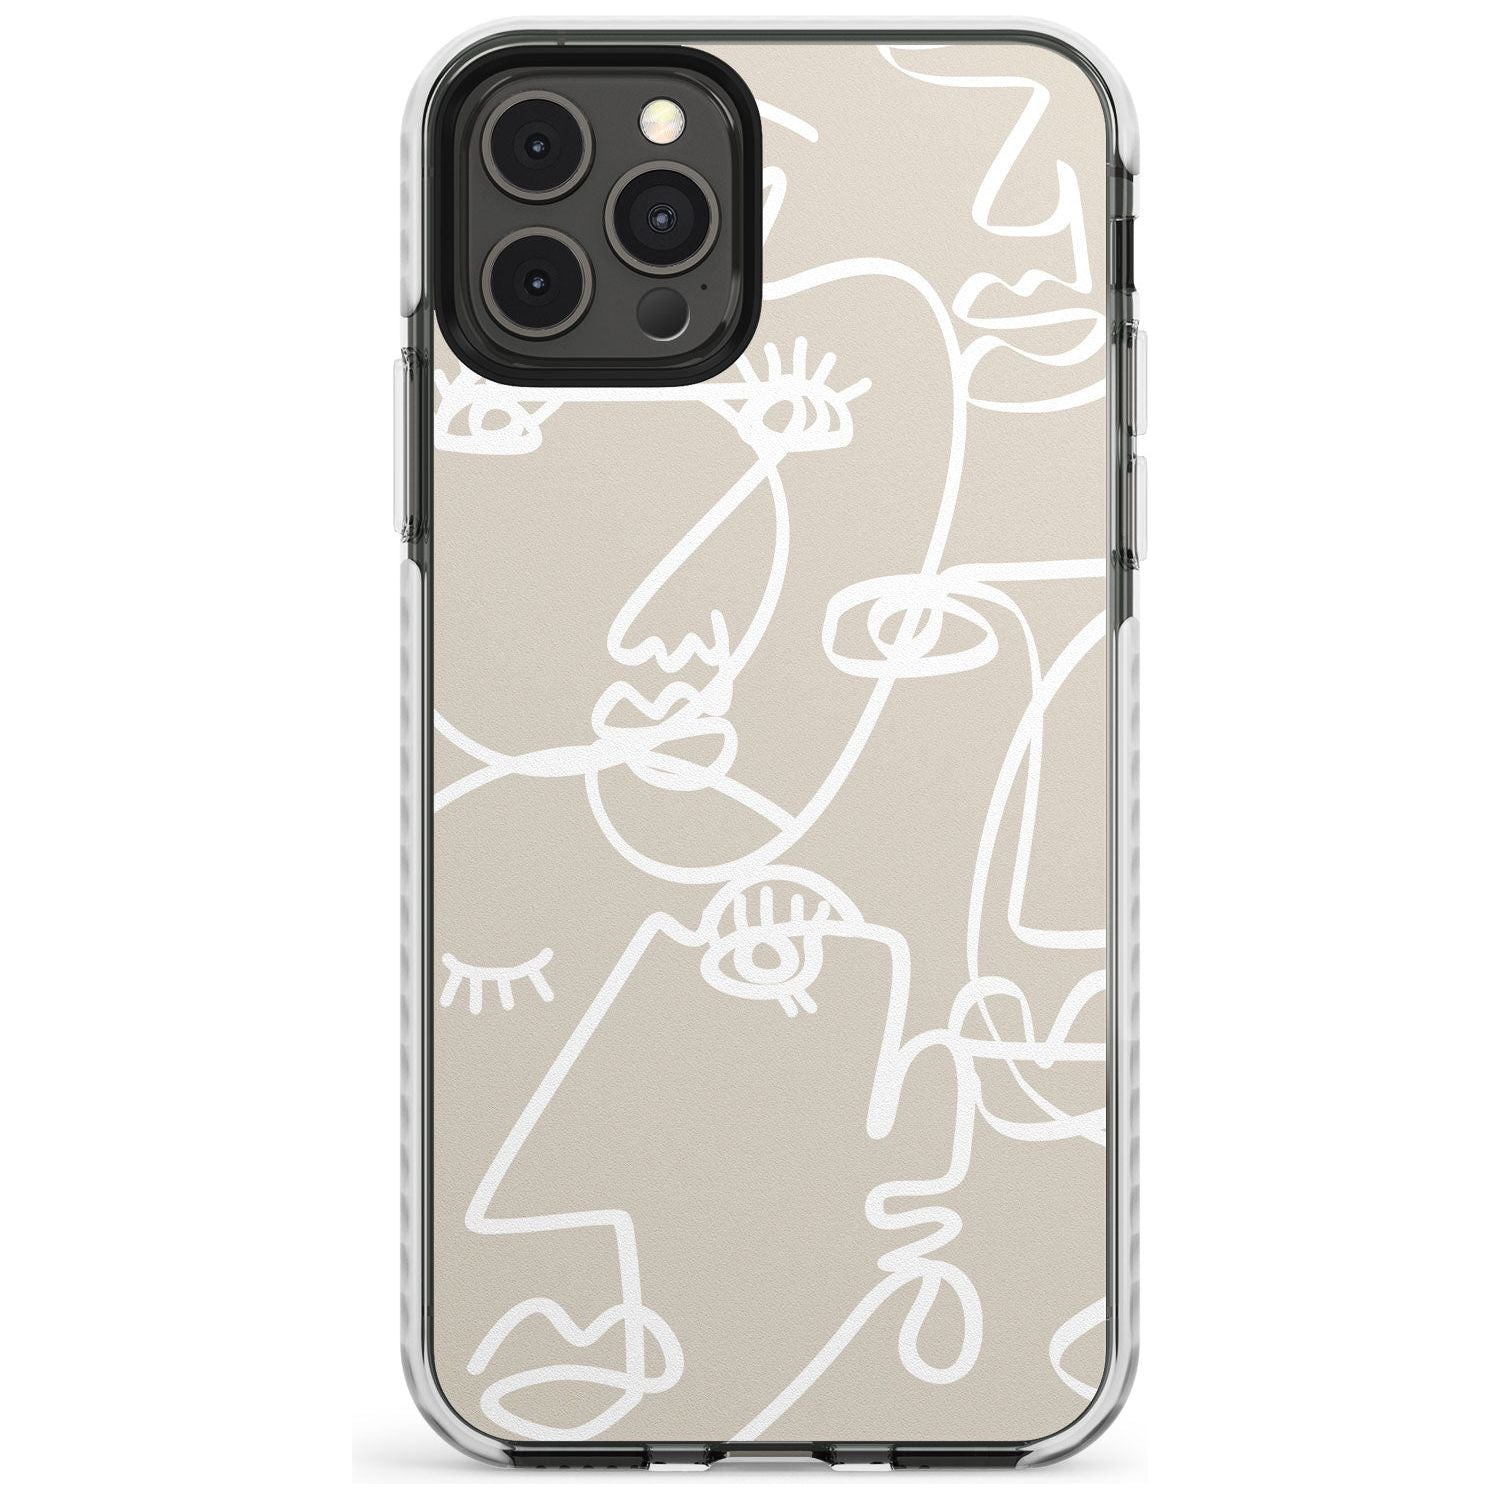 Continuous Line Faces: White on Beige Slim TPU Phone Case for iPhone 11 Pro Max